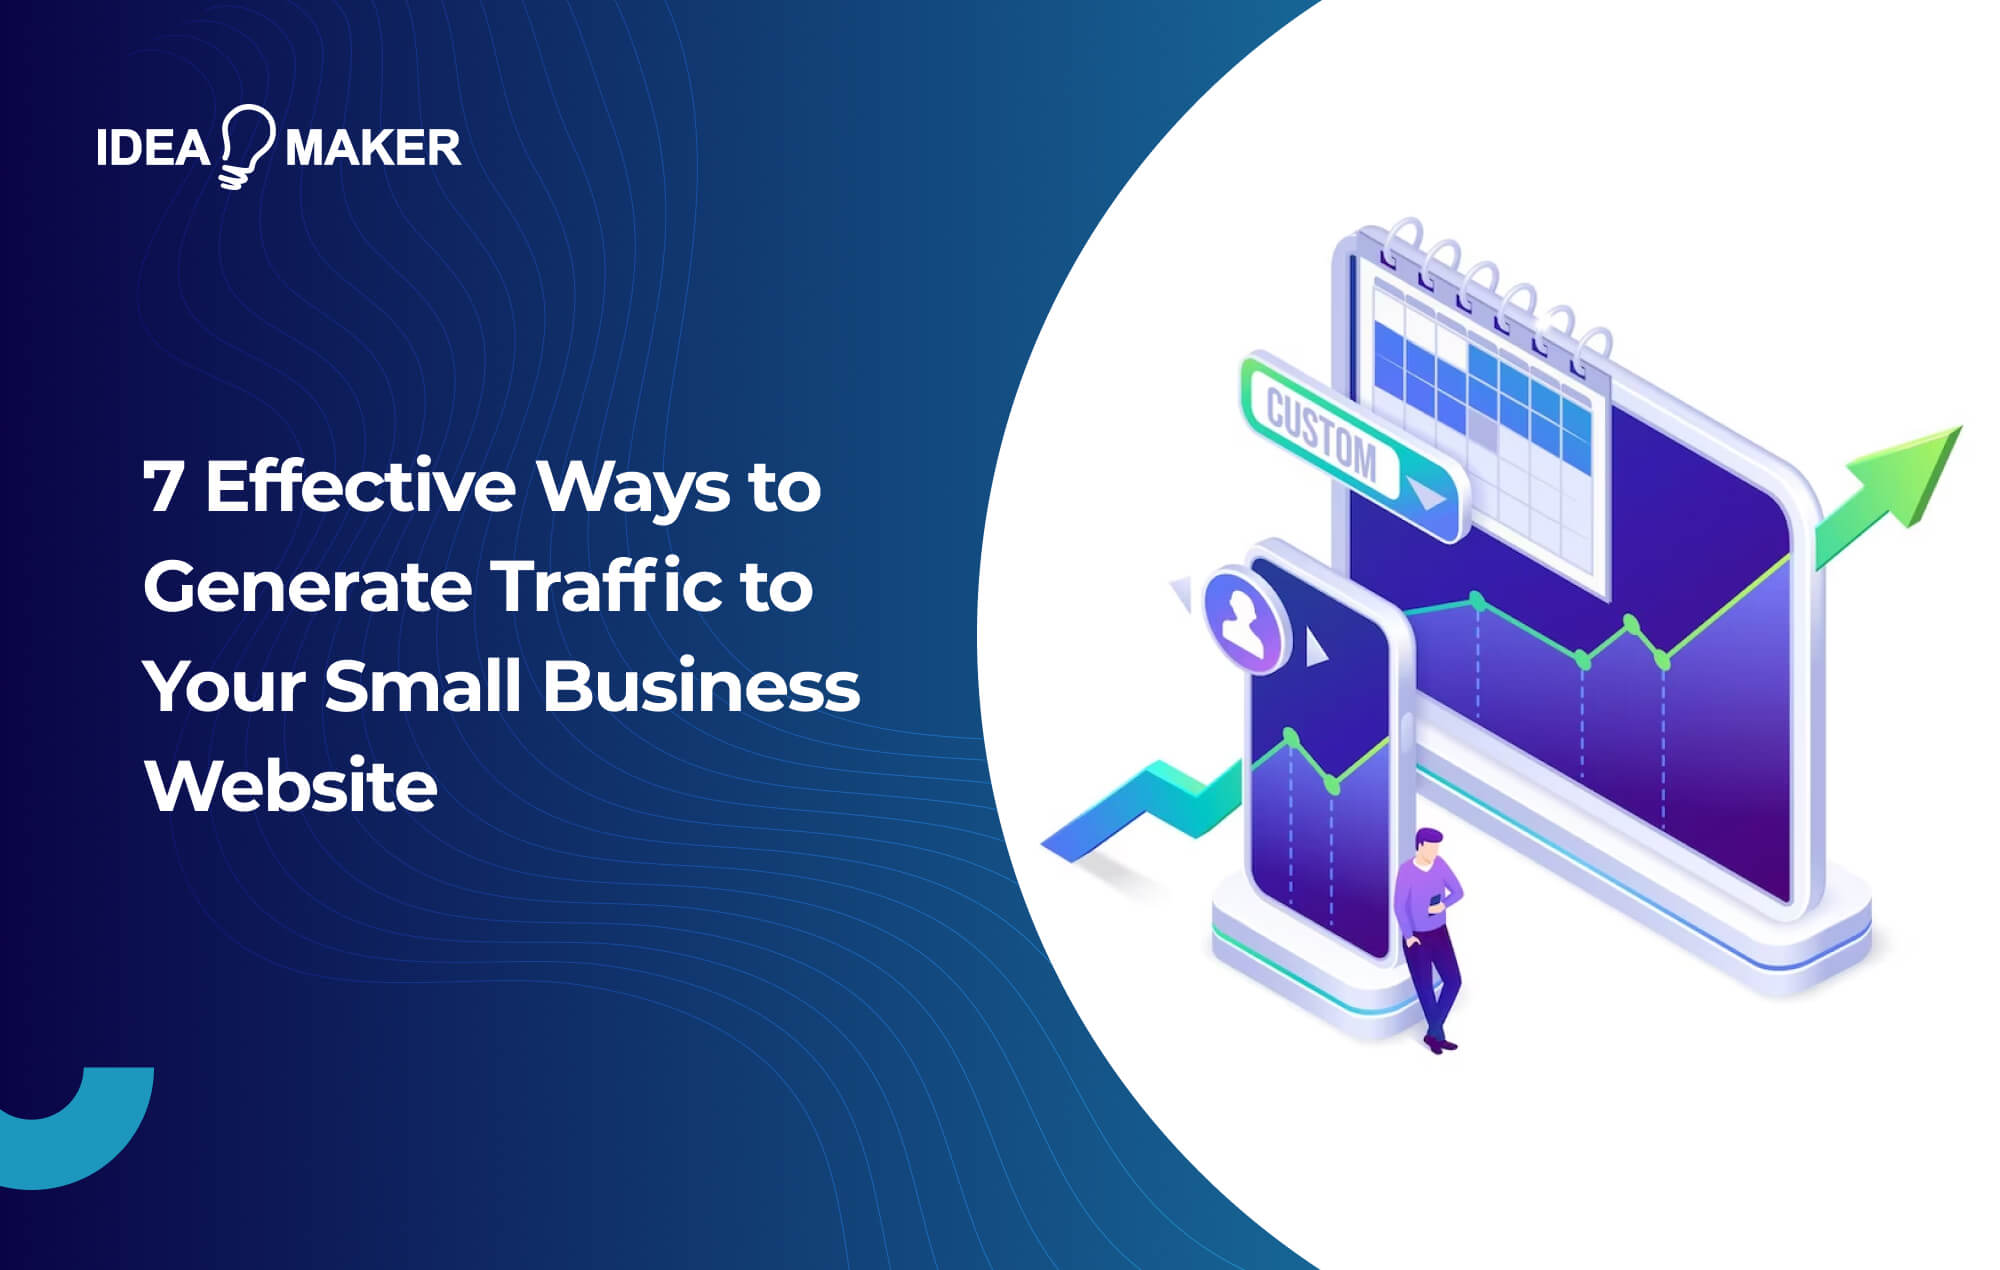 7 Effective Ways to Drive Traffic to Your Small Business Website